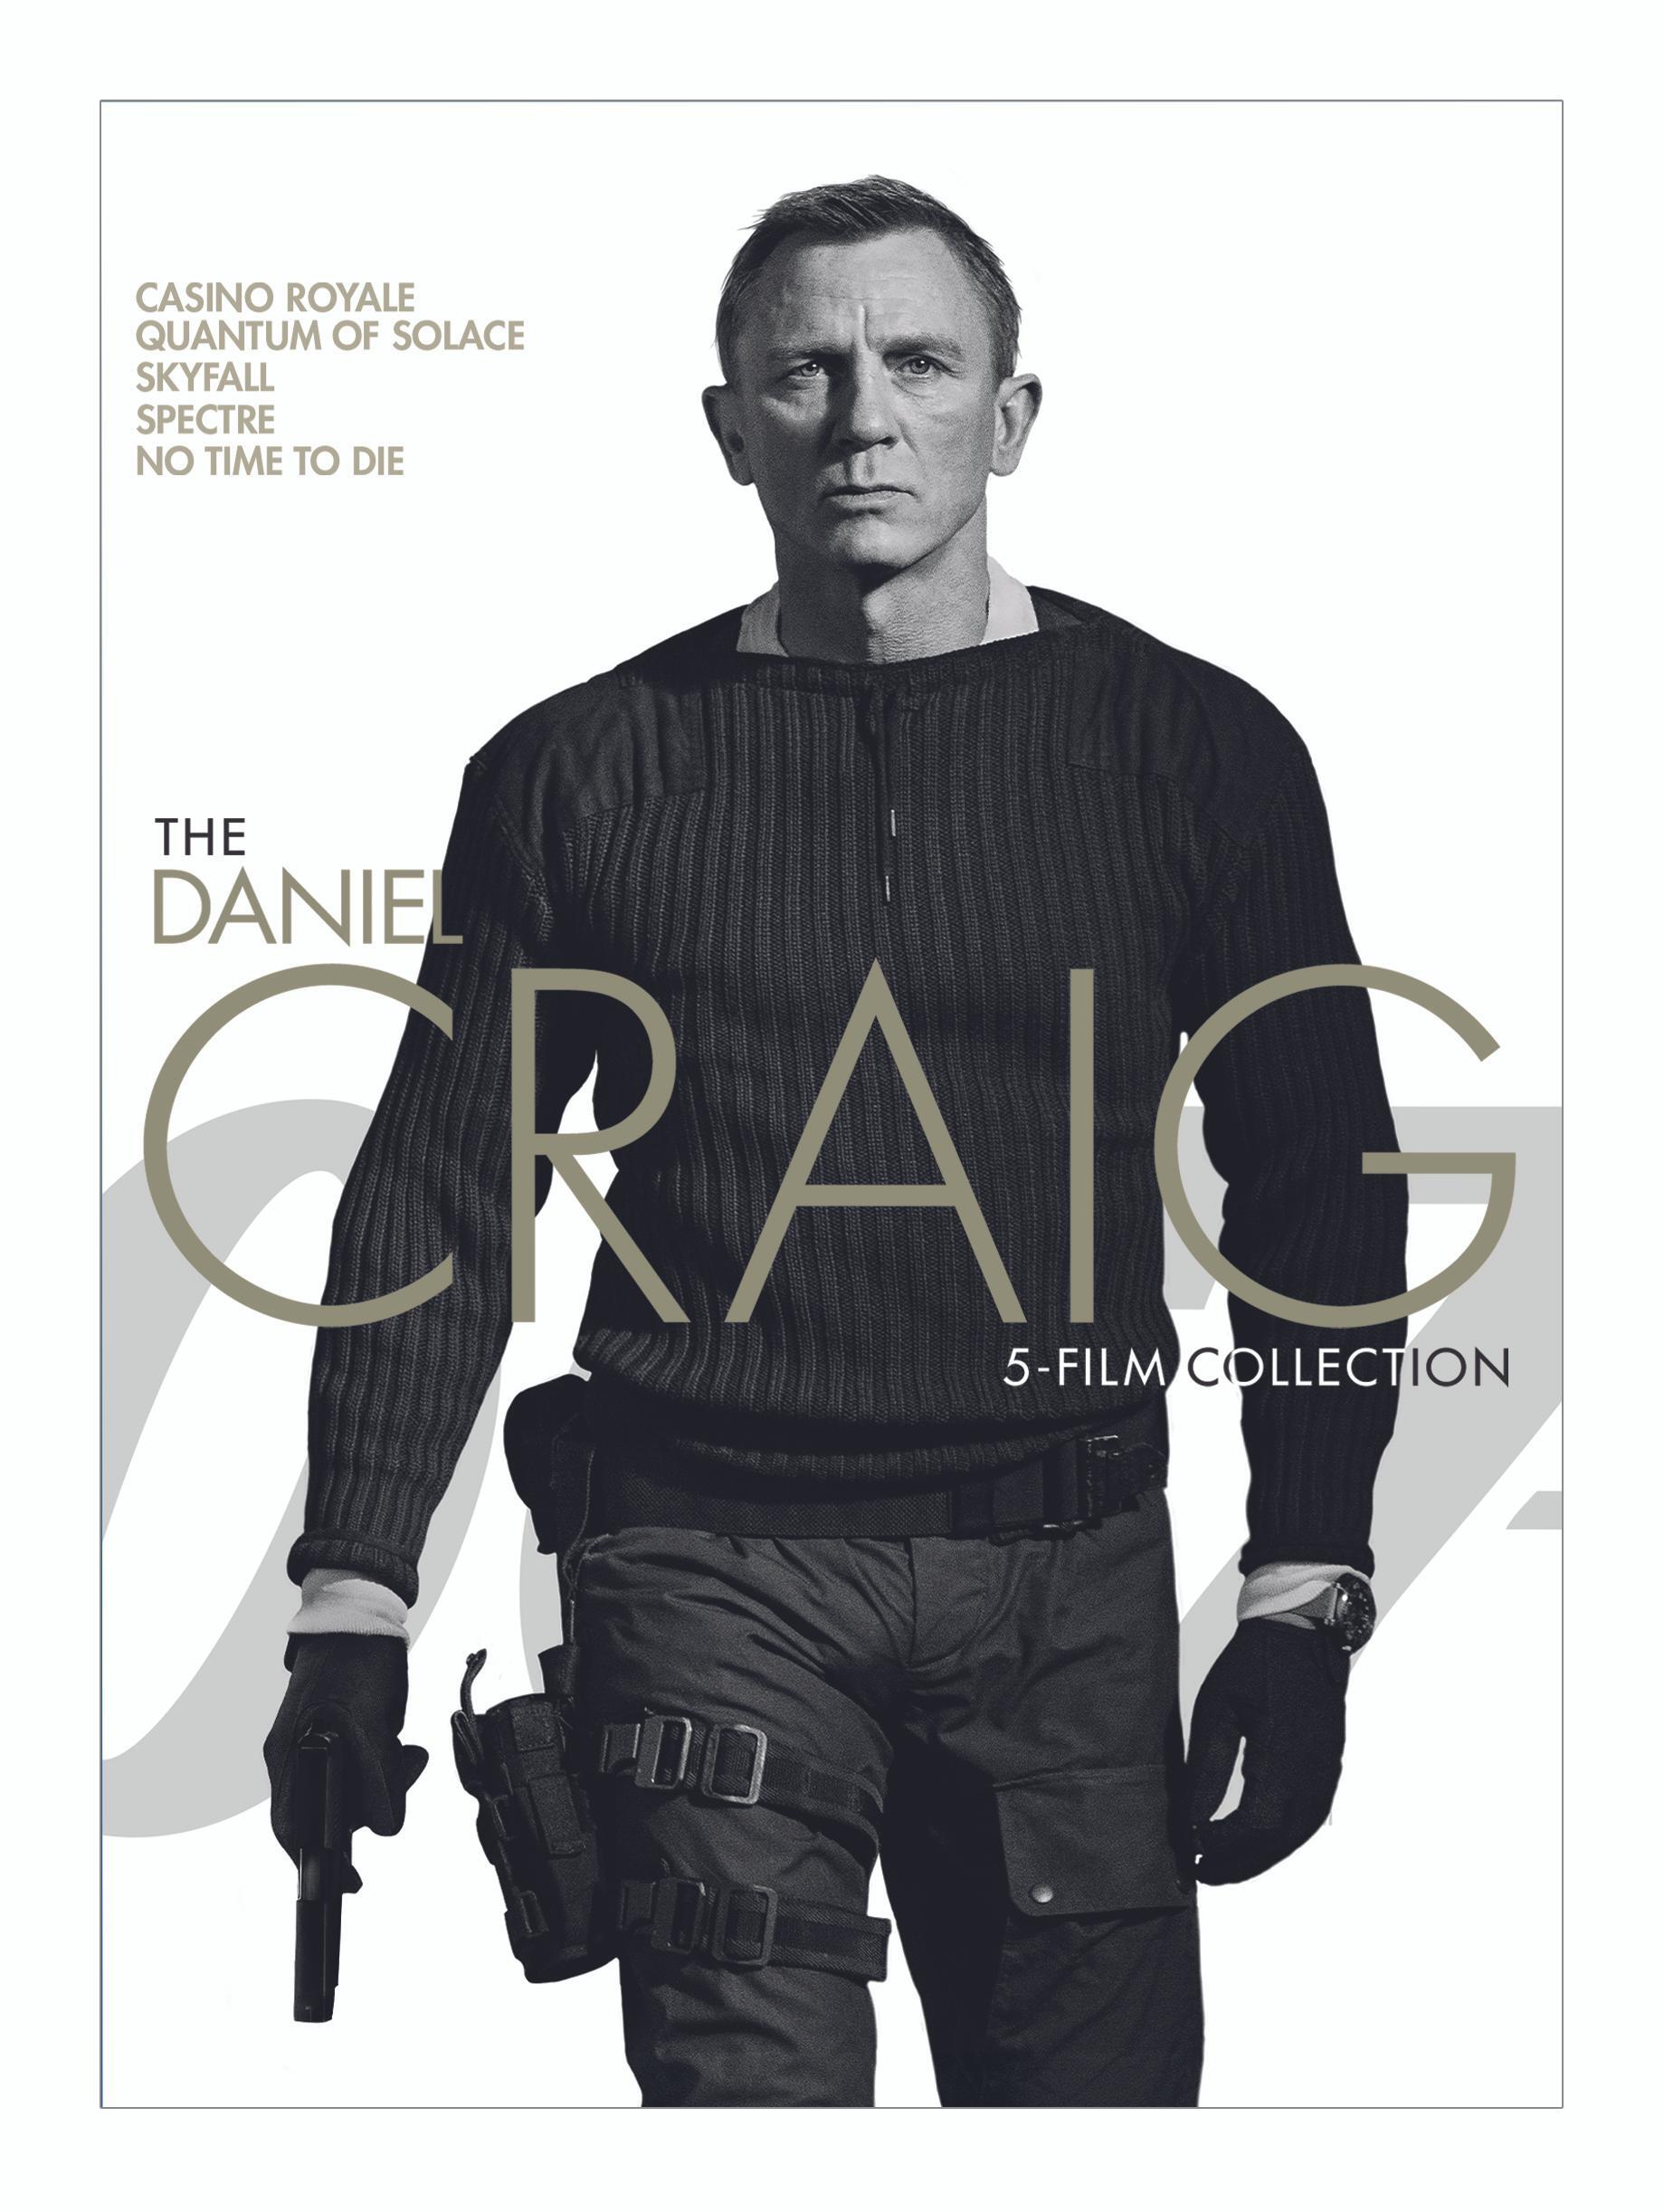 The Daniel Craig 5-film Collection (Box Set) - DVD [ 2021 ]  - Action Movies On DVD - Movies On GRUV